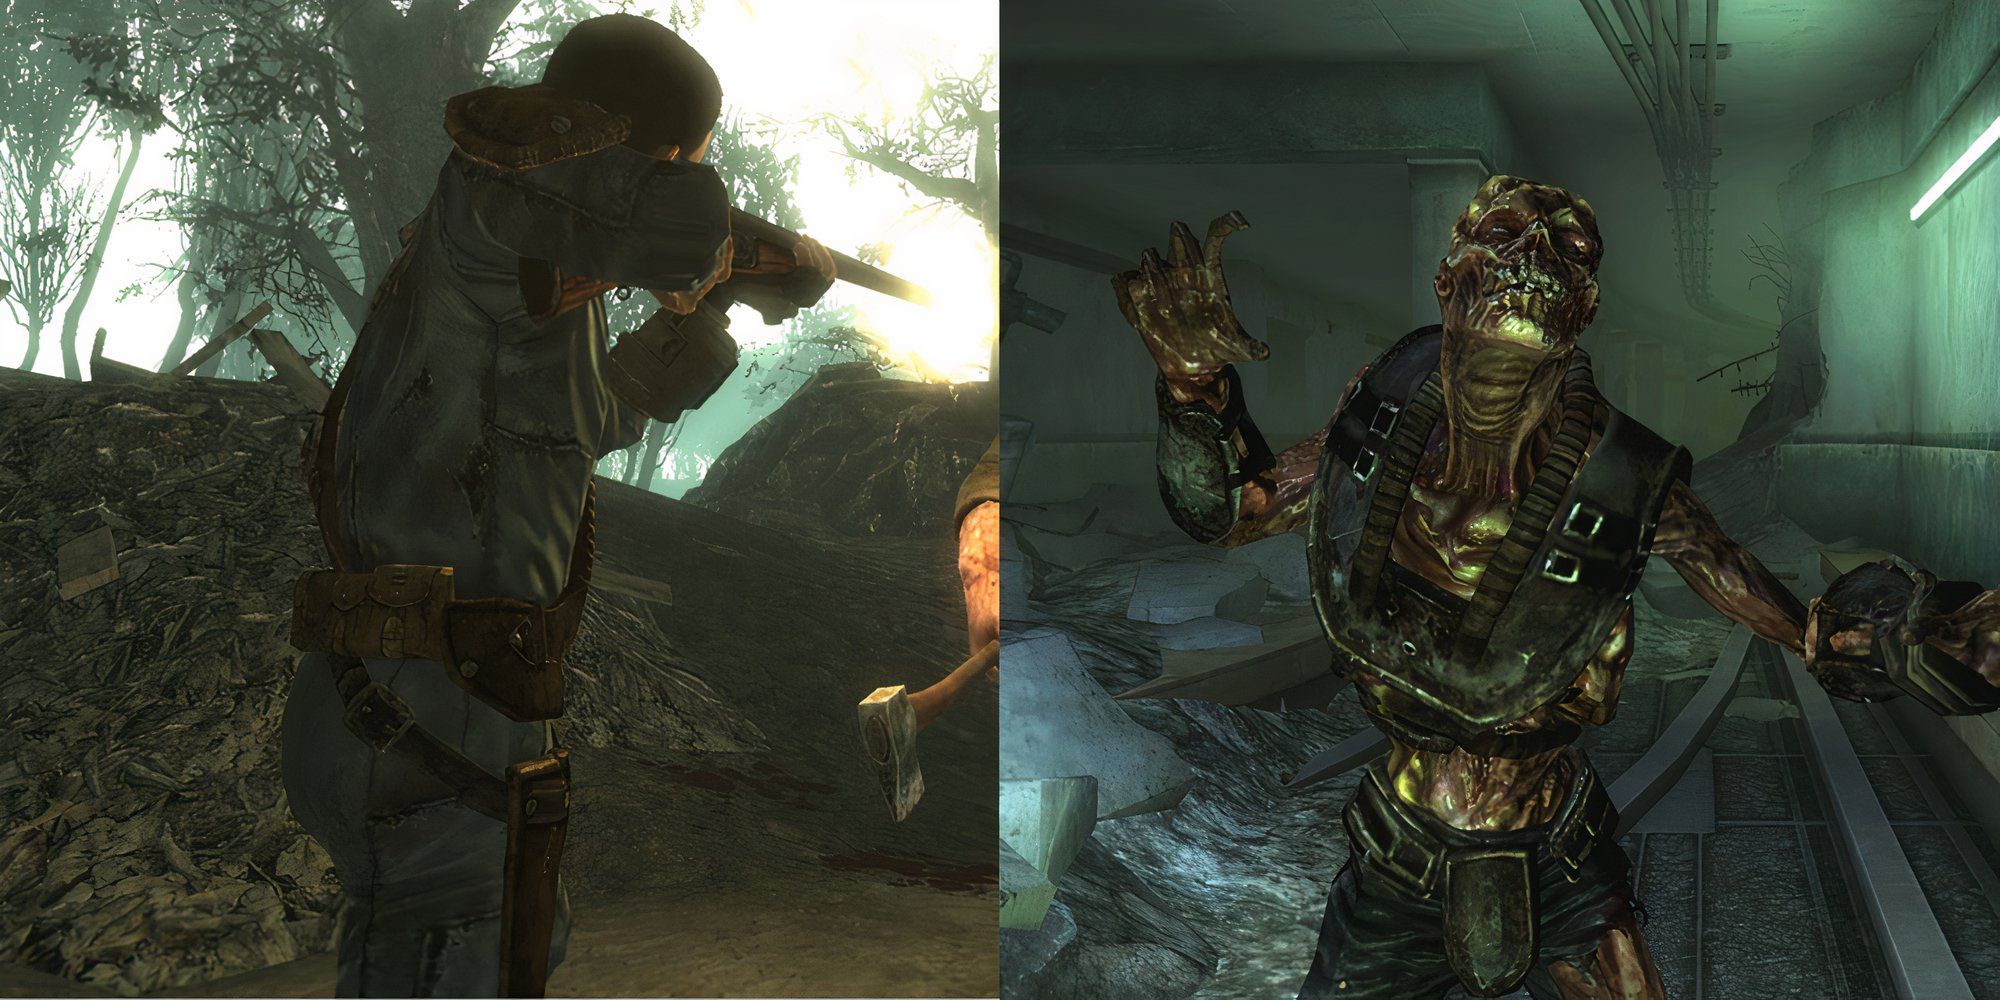 Character firing a repeater rifle and an undead enemy